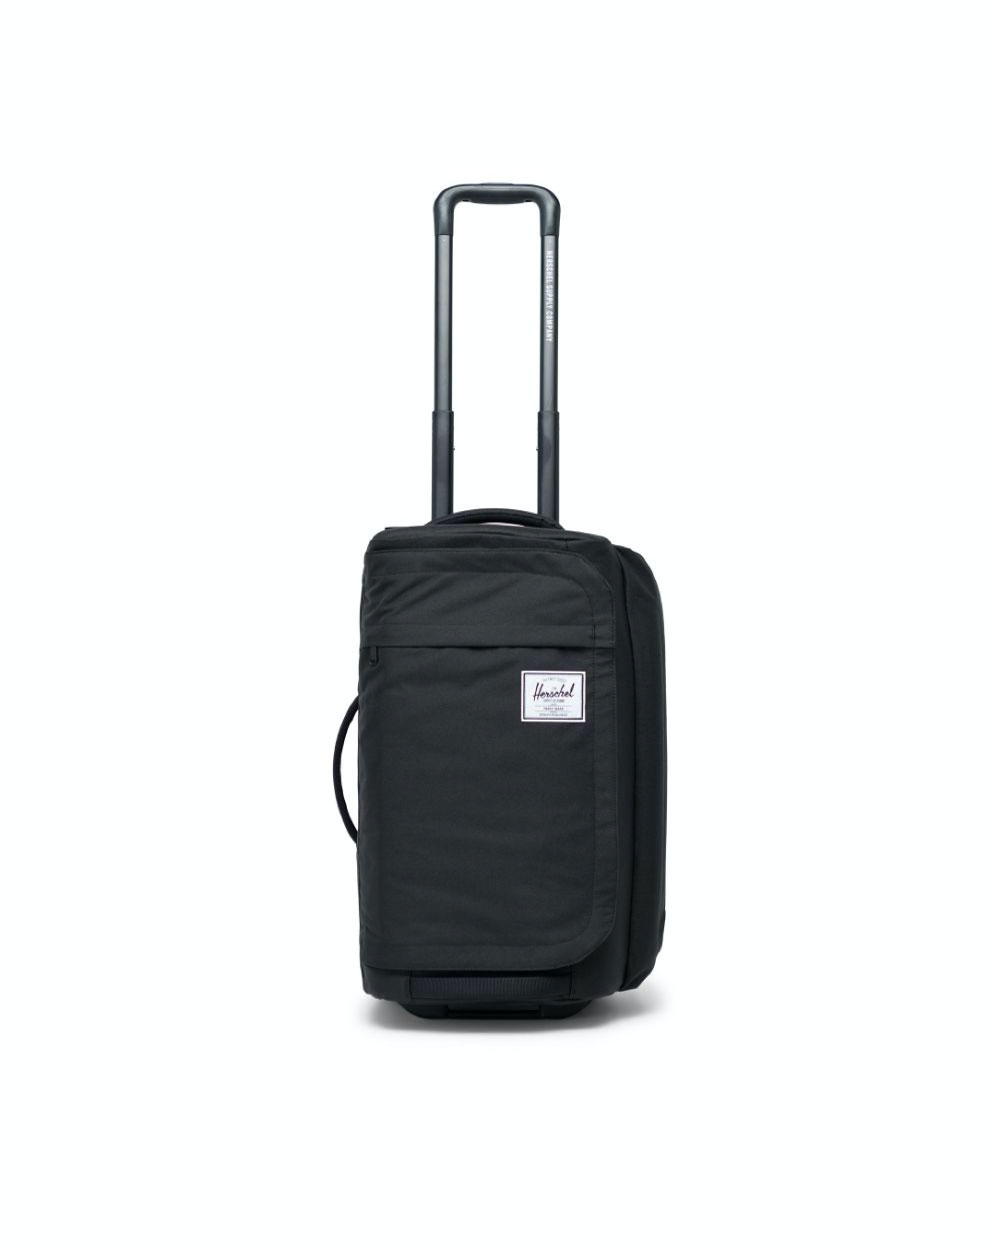 image of a black outfitter 50 litre luggage